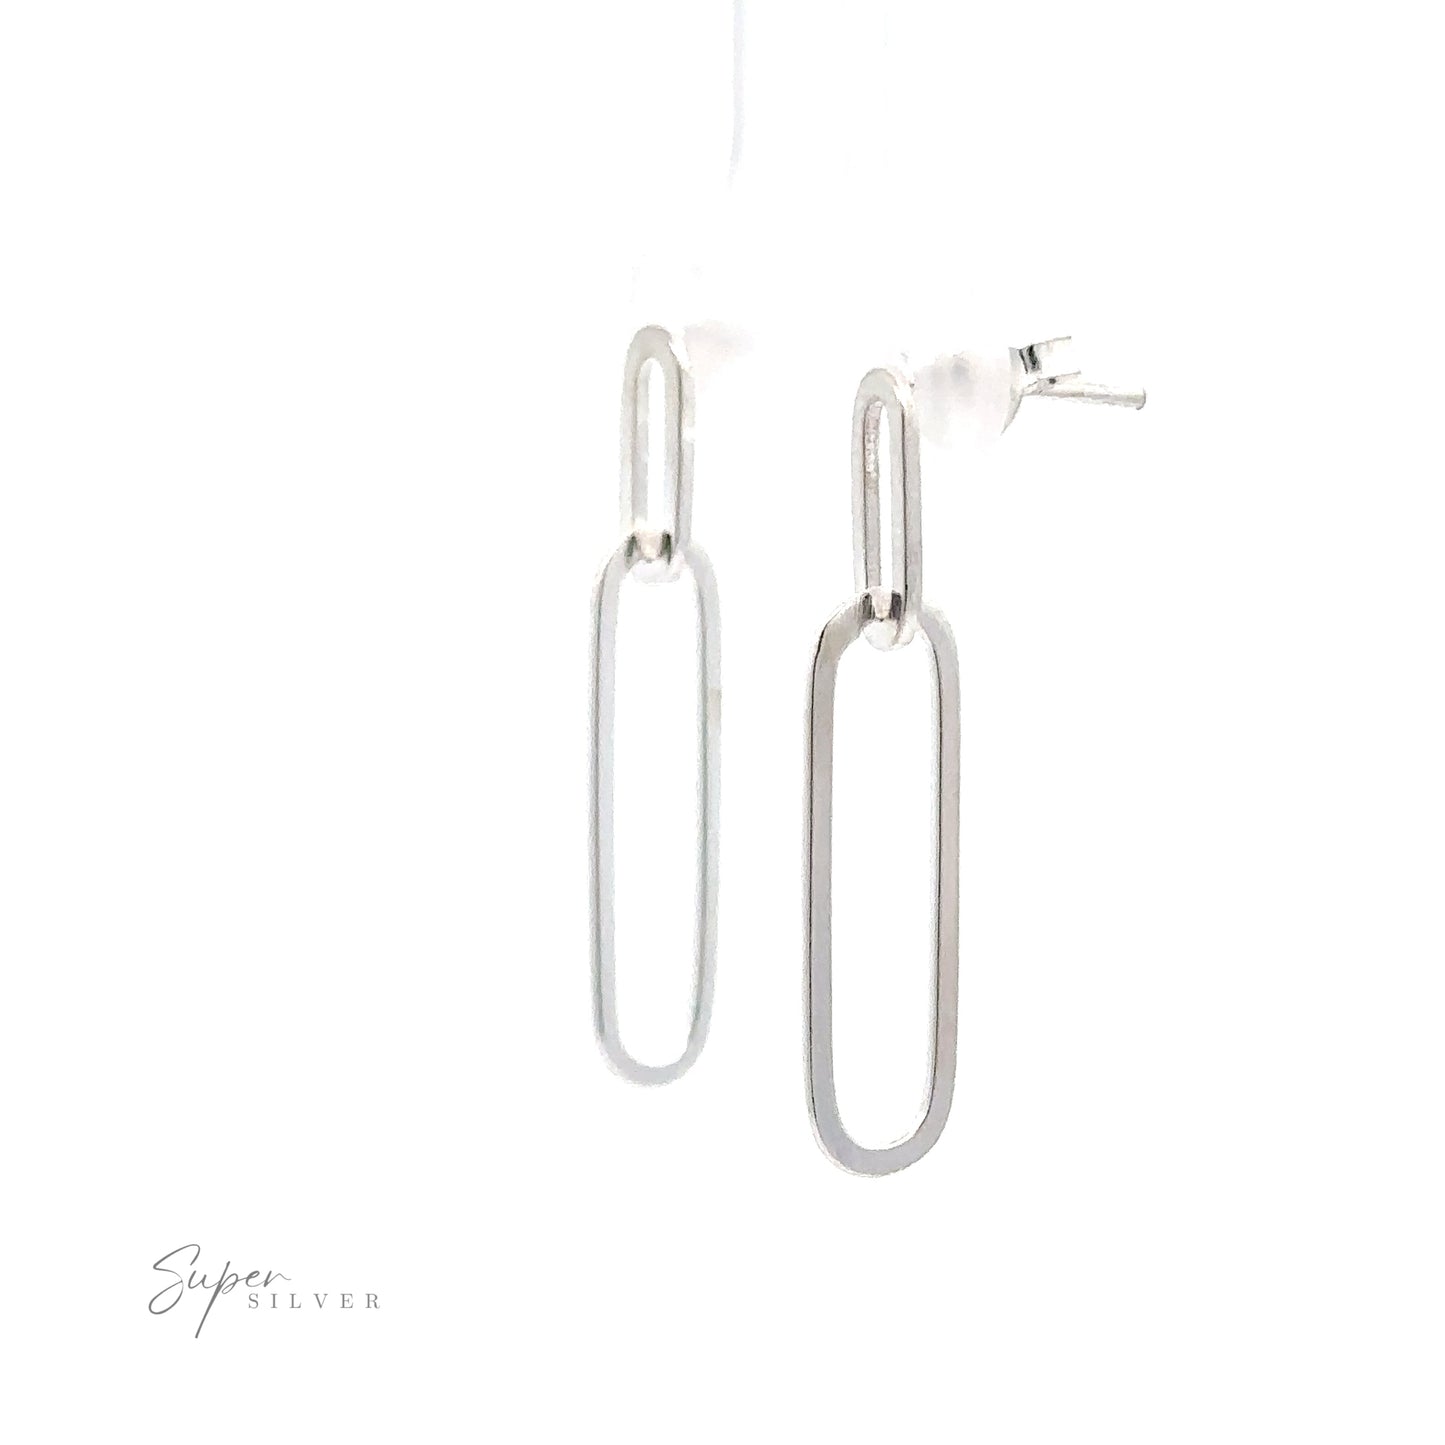 A pair of modern Chain Link Post Earrings on a white background.